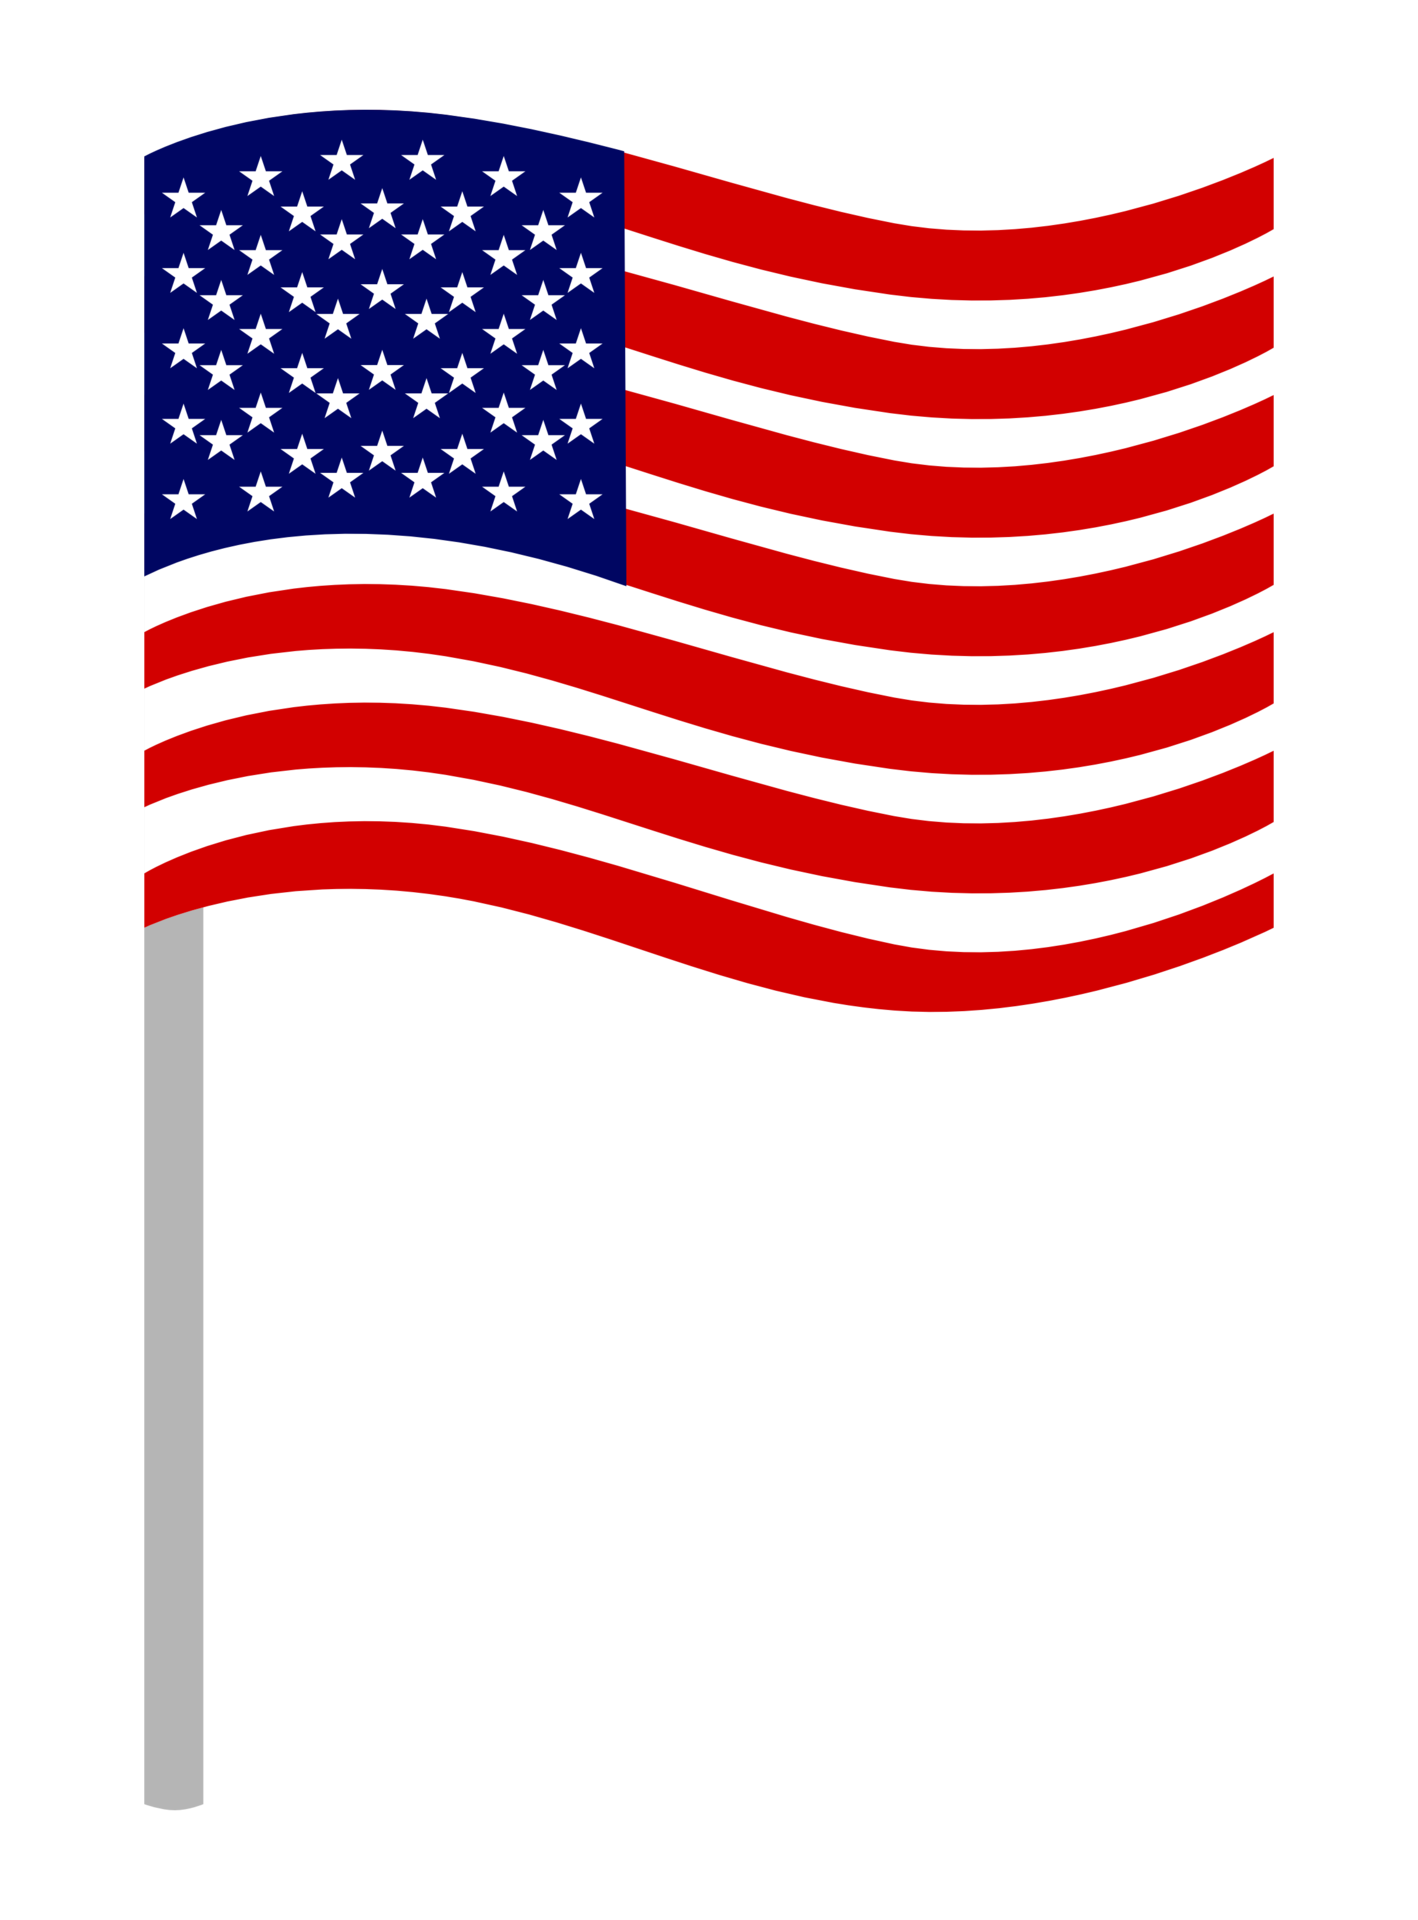 https://static.vecteezy.com/system/resources/previews/011/222/118/original/united-states-flag-symbol-file-free-png.png